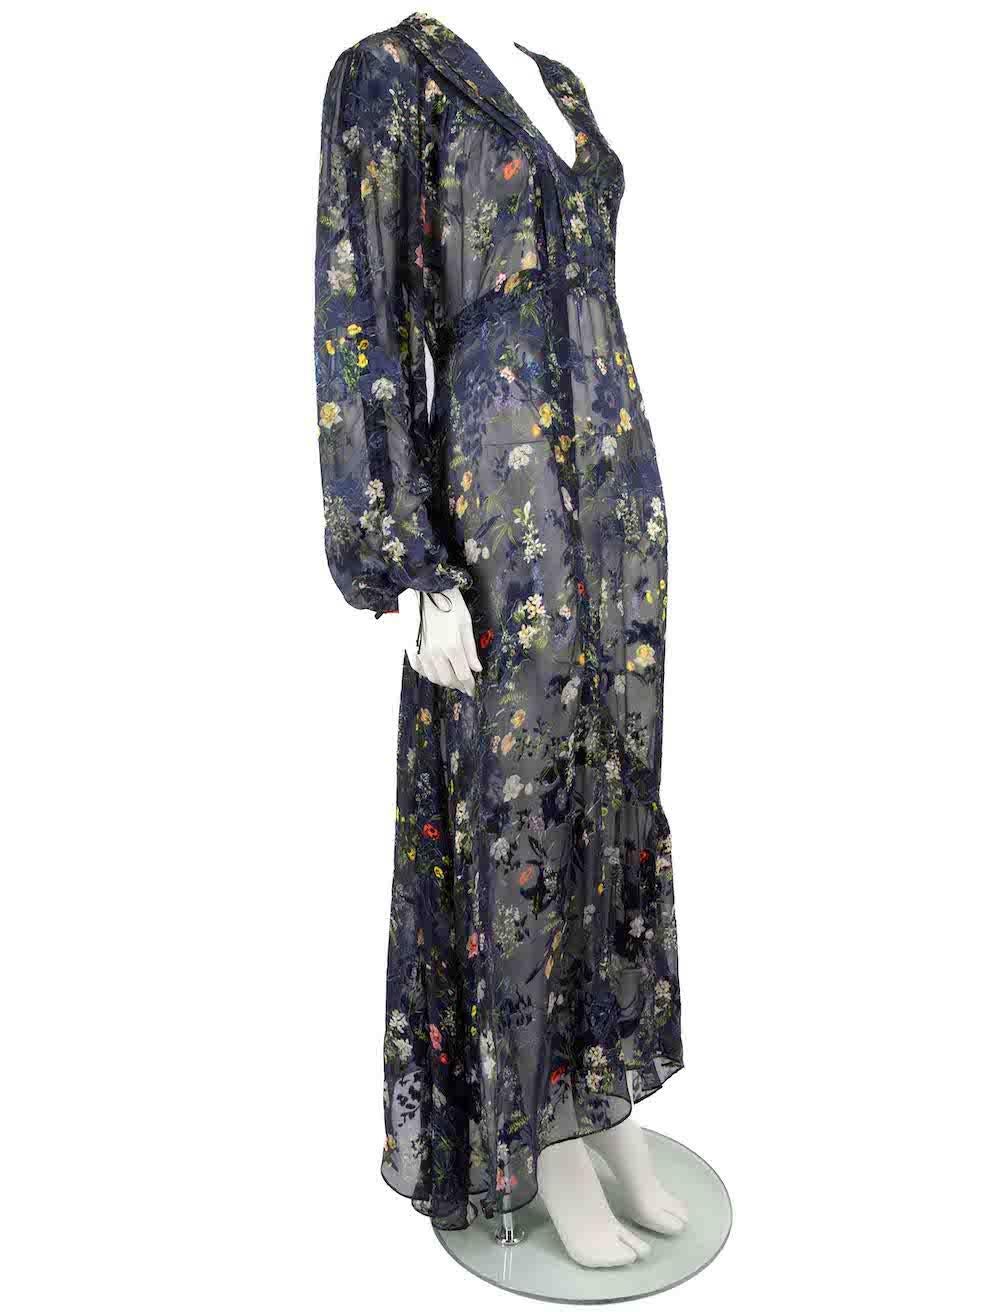 CONDITION is Very good. Hardly any visible wear to dress is evident on this used Preen By Thornton Bregazzi designer resale item.
 
 Details
 Multicolour- Navy tone
 Viscose
 Maxi dress
 Floral print pattern
 Sheer
 V neckline
 Tie strap on